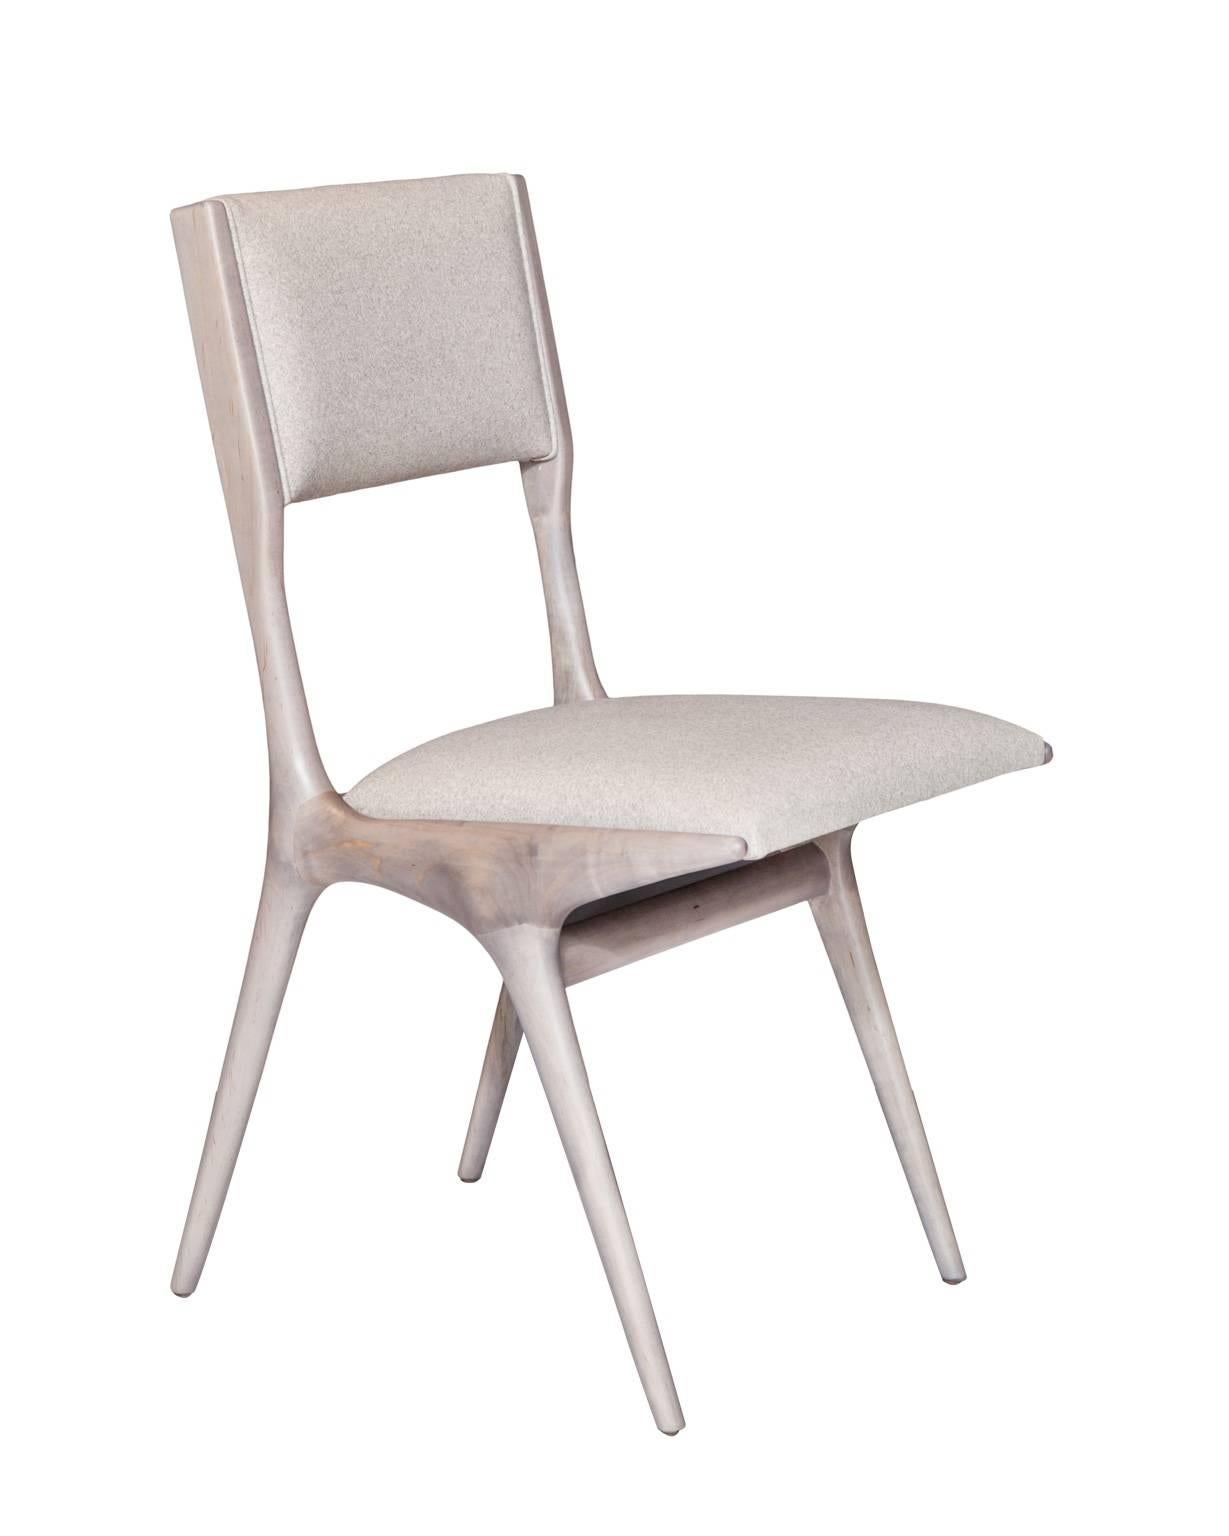 Bleached Boone Dining Chairs For Sale